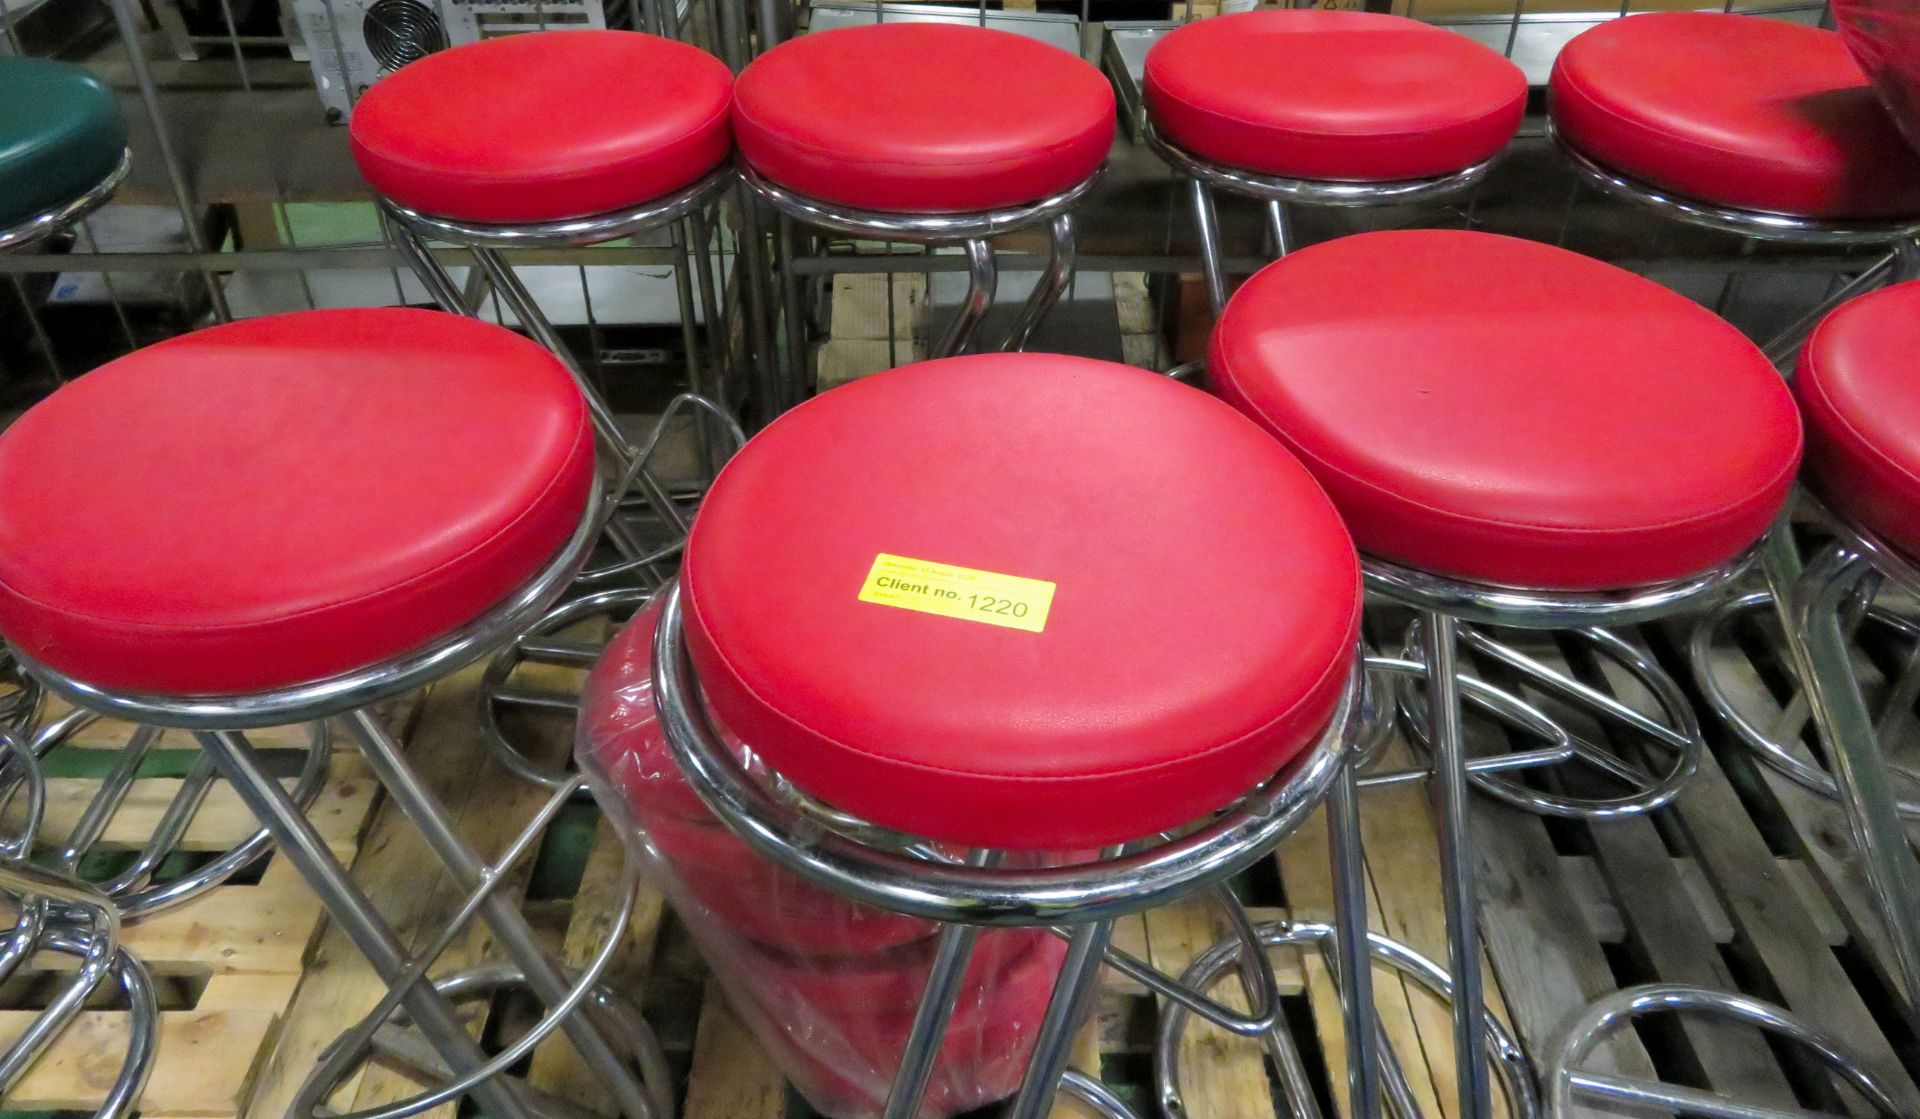 6x Red Zeus Stools with 6 Spare Tops.